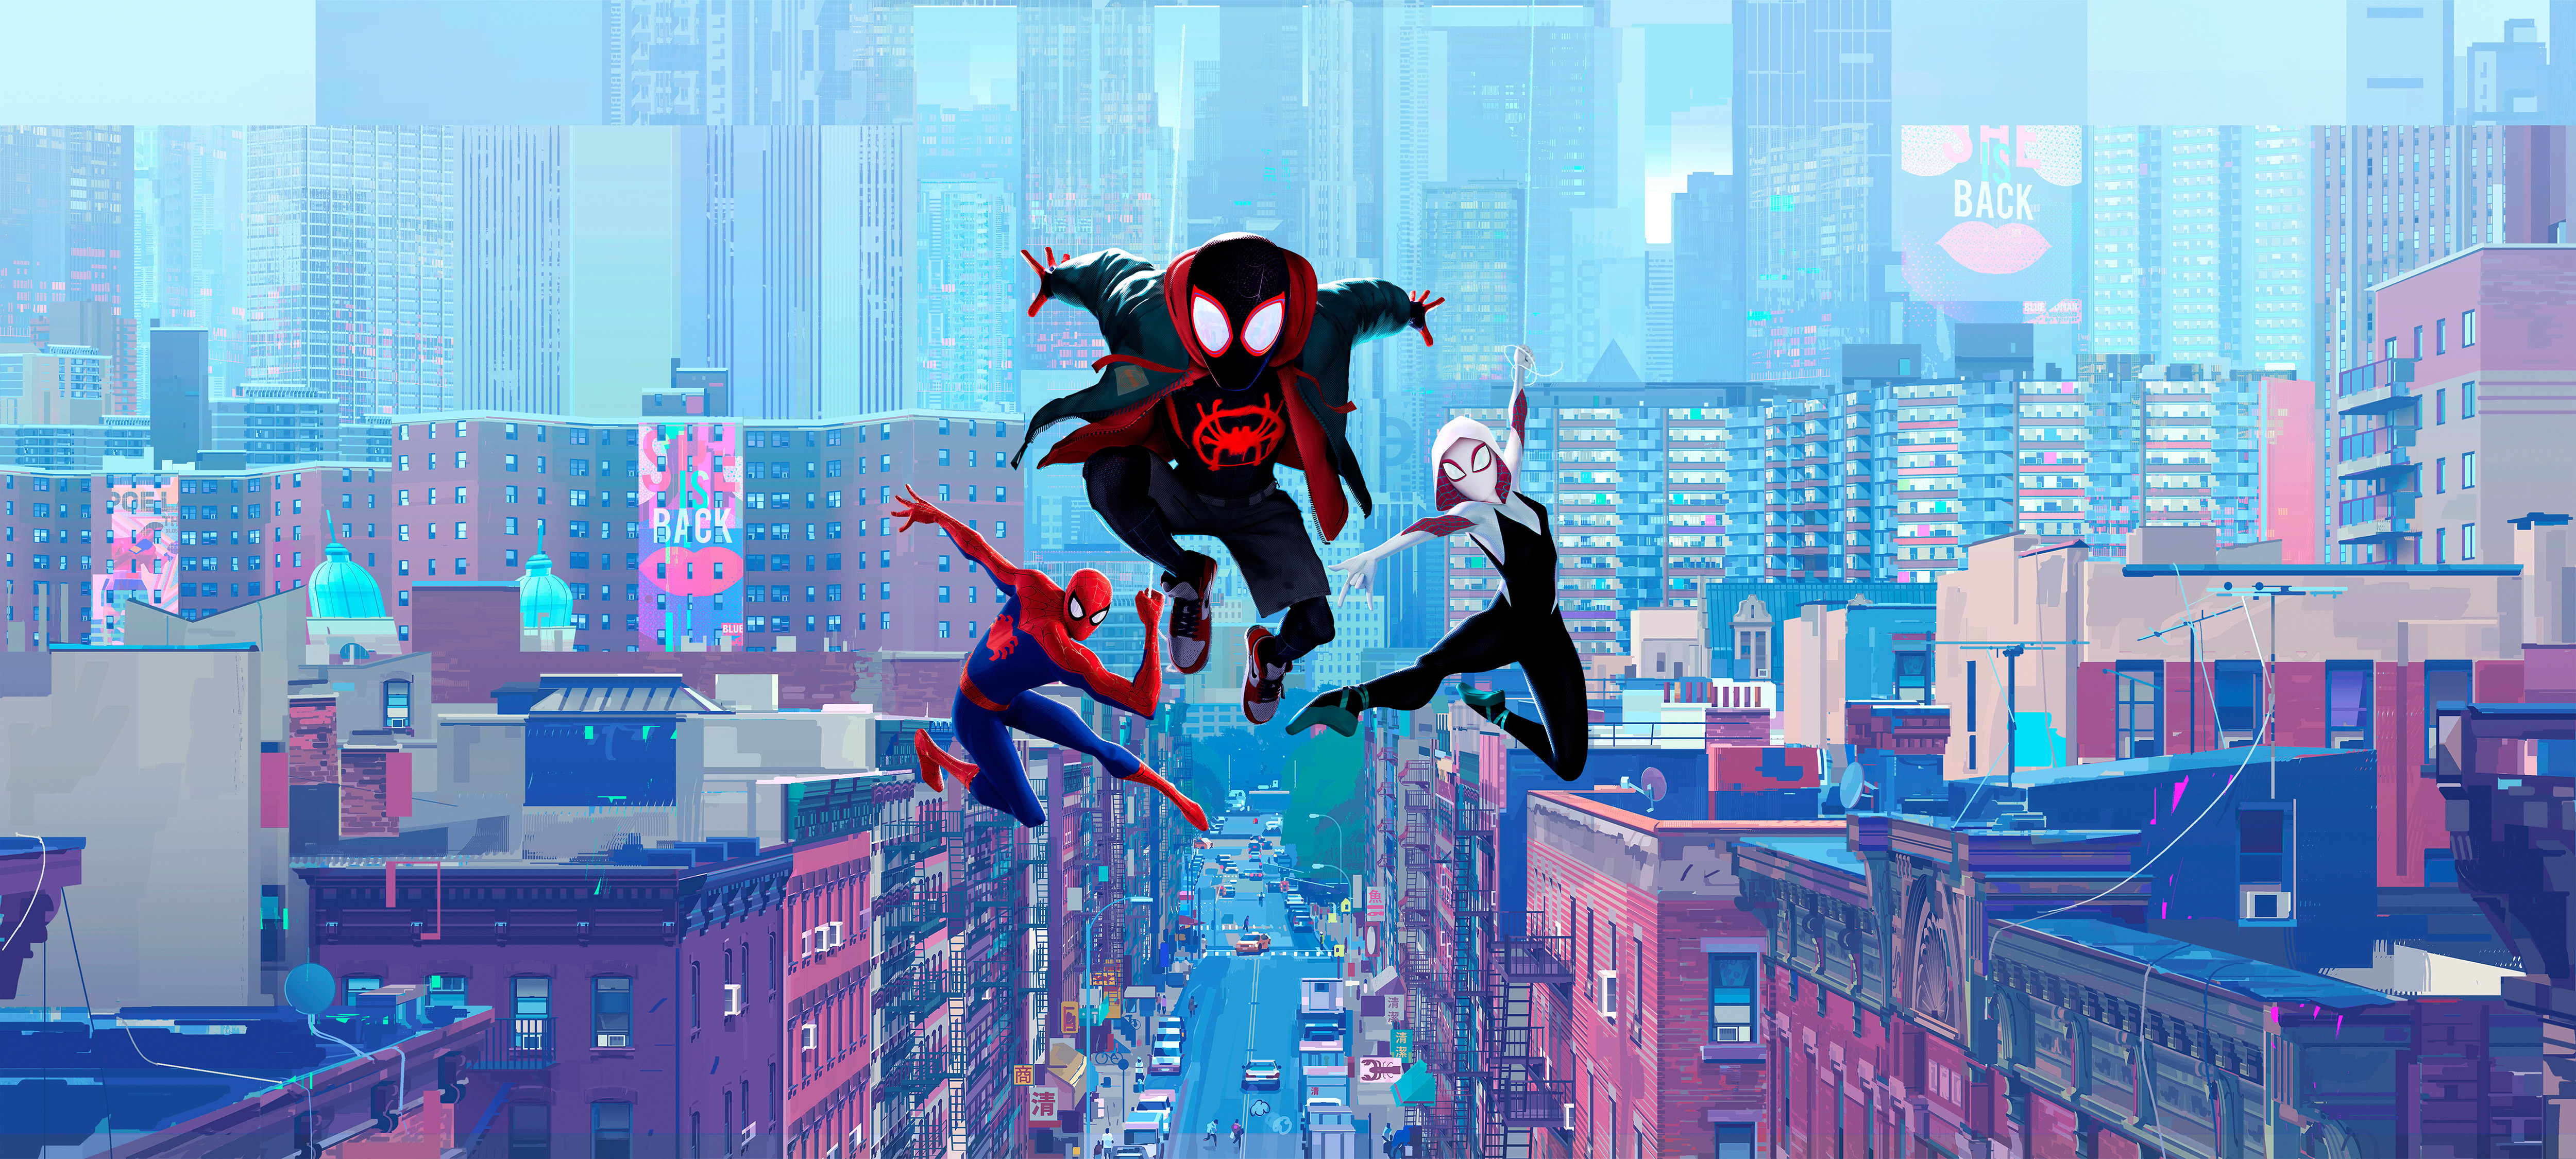 Spider-Man: Into the Spider-Verse Wallpaper 4K, Miles Morales, Movies, #2948